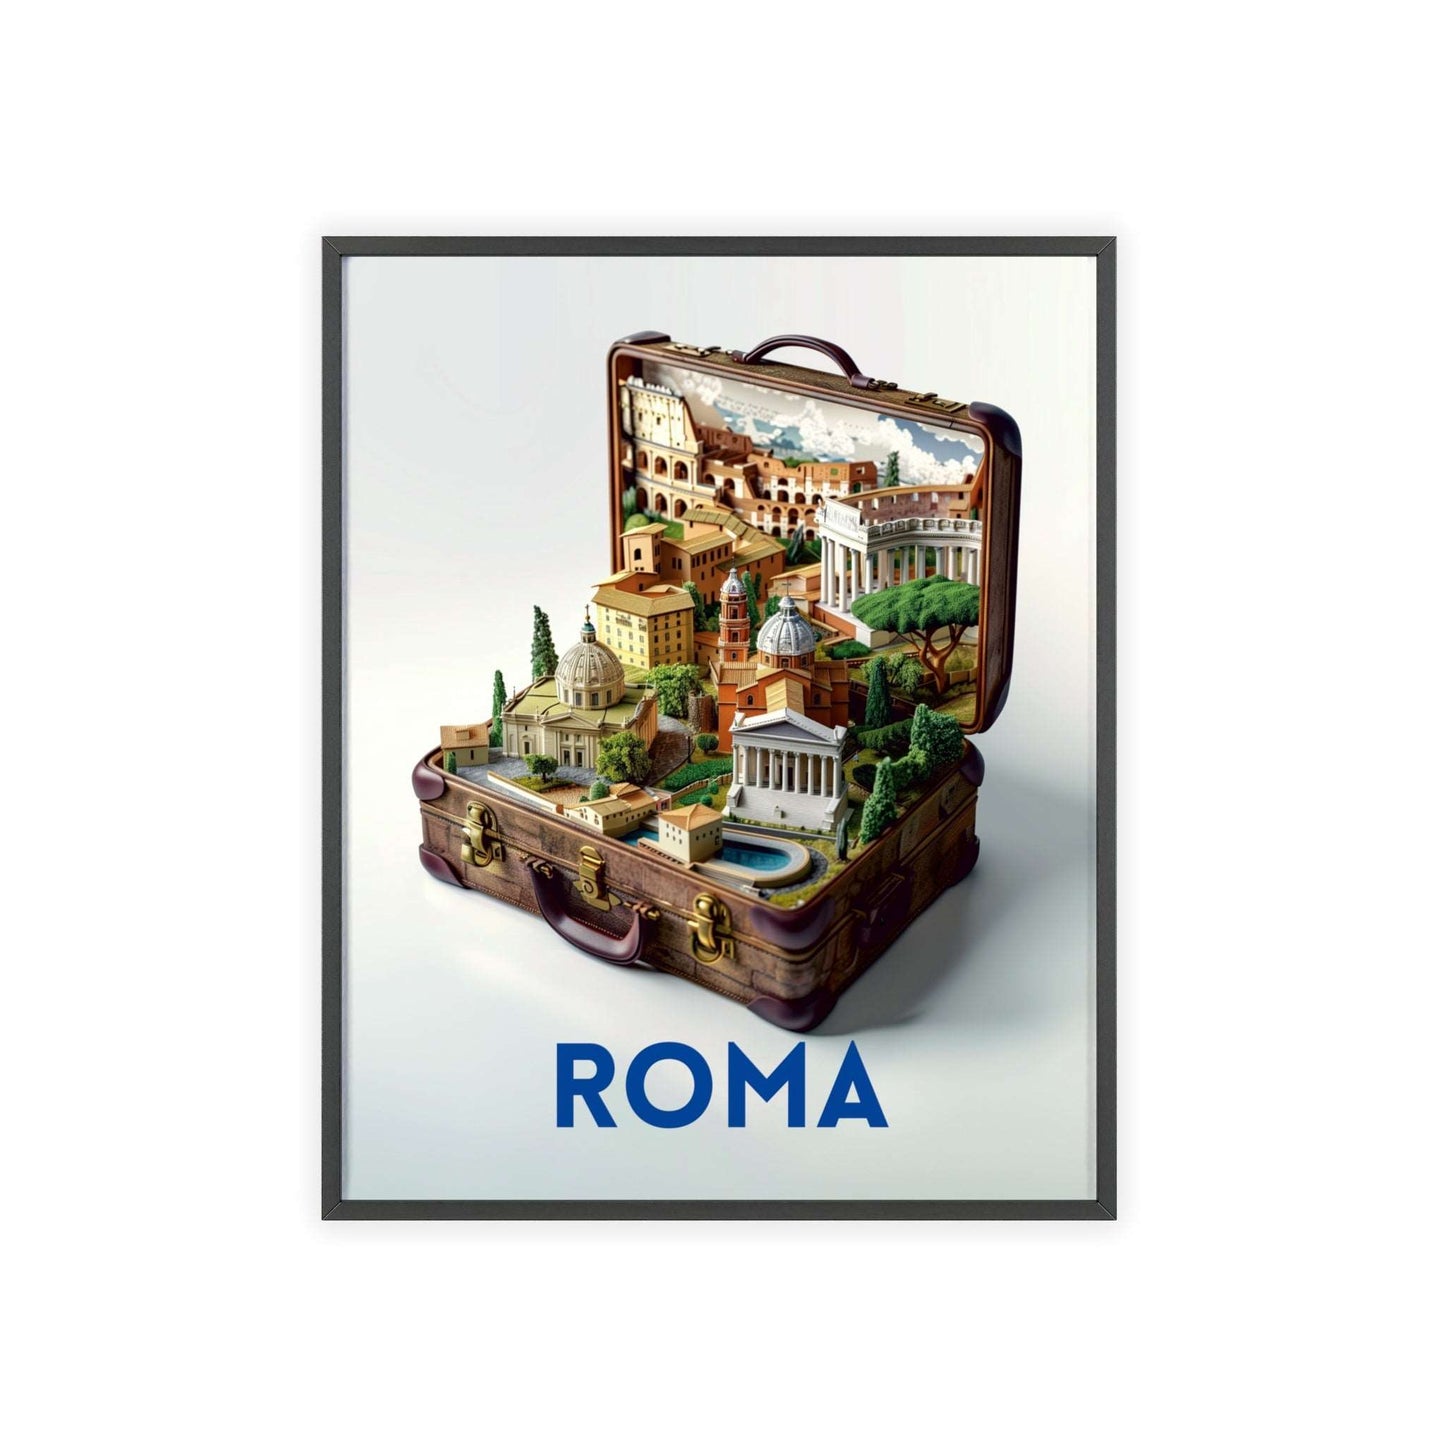 Beautiful Rome in a Suitcase travel poster featuring iconic landmarks, inspiring wanderlust and a love for timeless travel